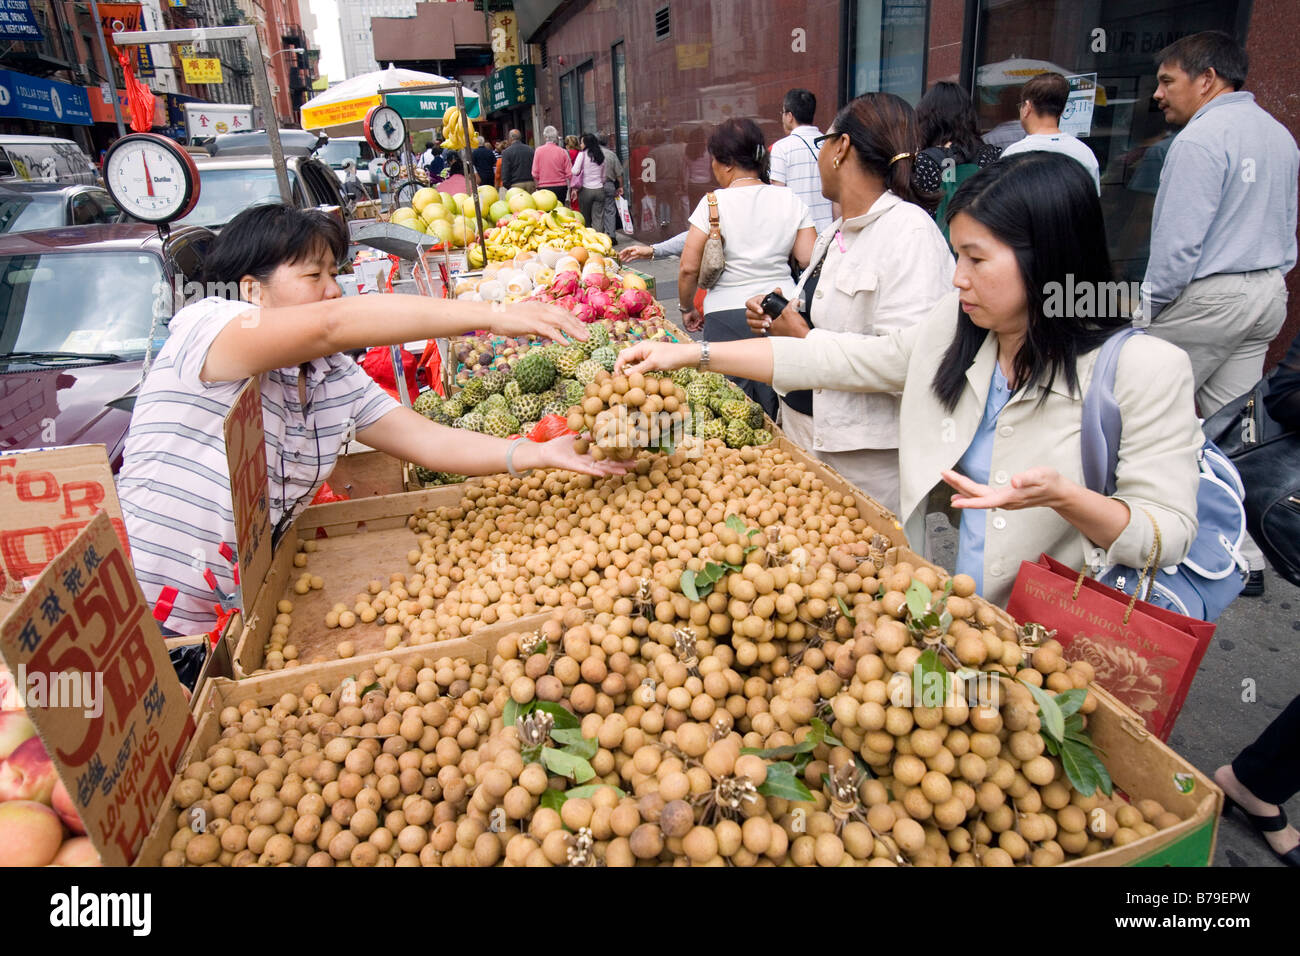 A Chinese grocery market in Chinatown Manhattan New York City The